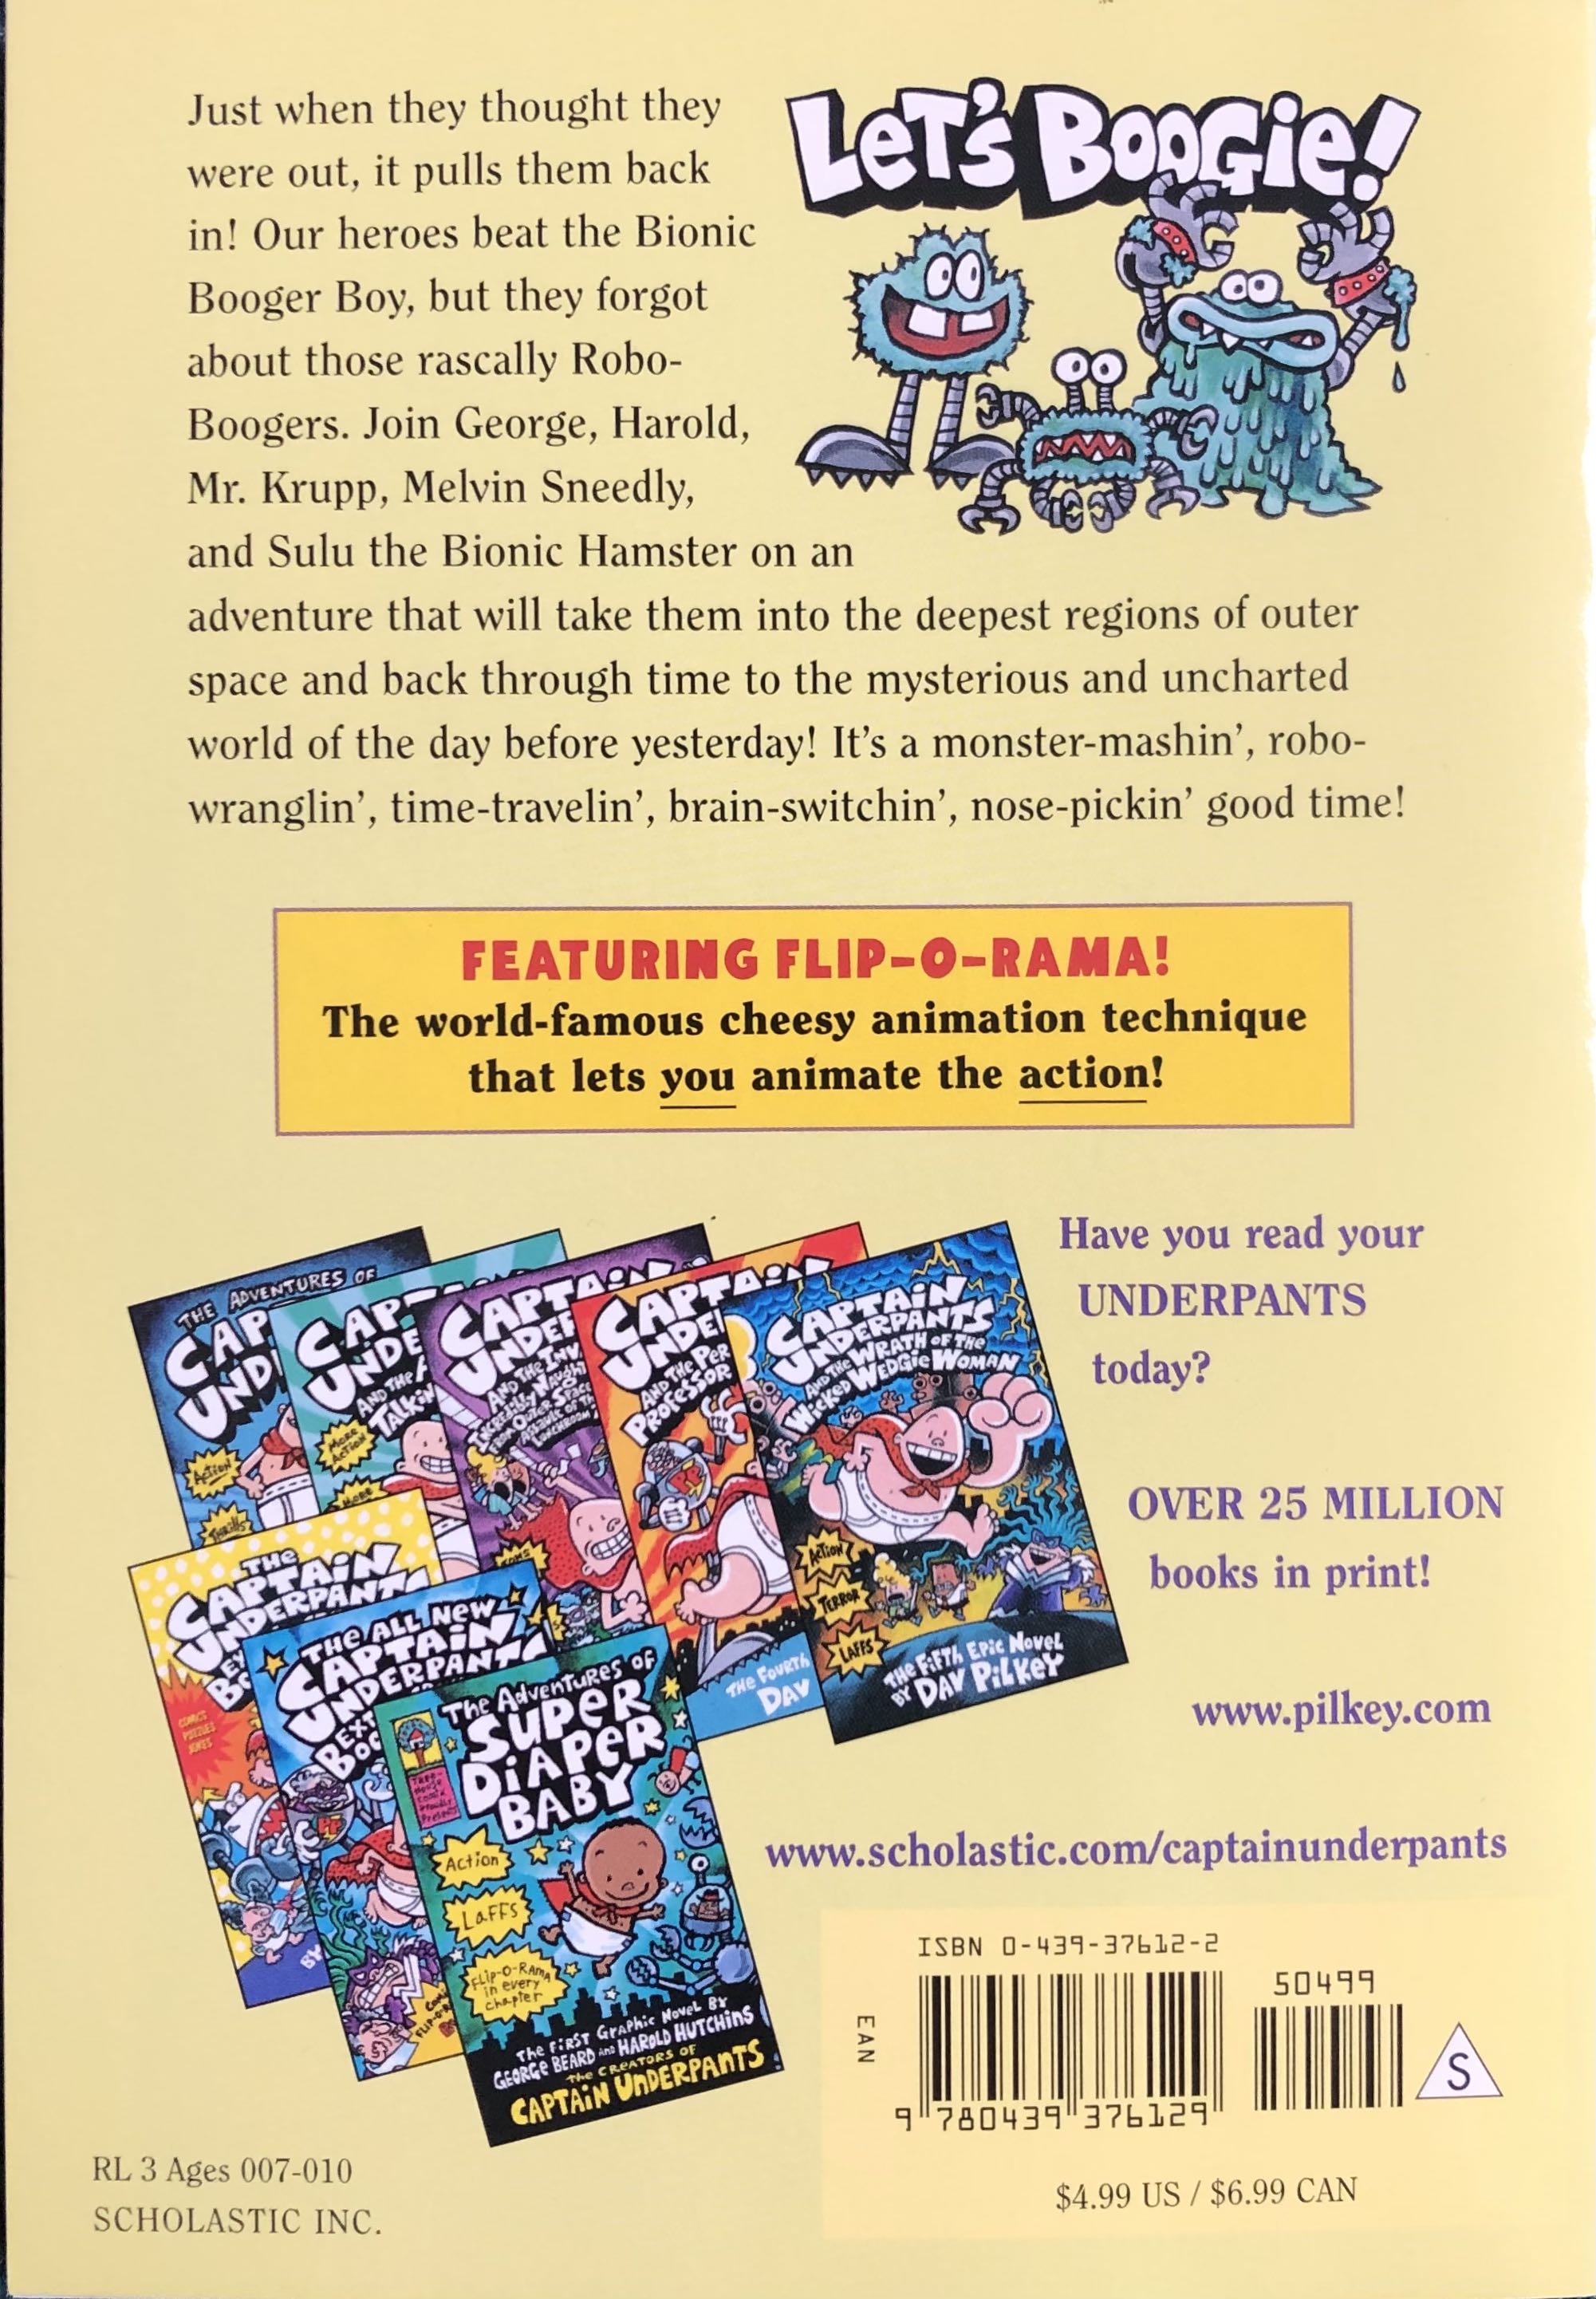 Captain Underpants 07: Captain Underpants and the Big, Bad Battle Of The Bionic Booger Boy Part 2 - Revenge Of The Ridiculous Robo-Boogers - Dav Pilkey (A Scholastic Press - Paperback) book collectible [Barcode 9780439977722] - Main Image 2